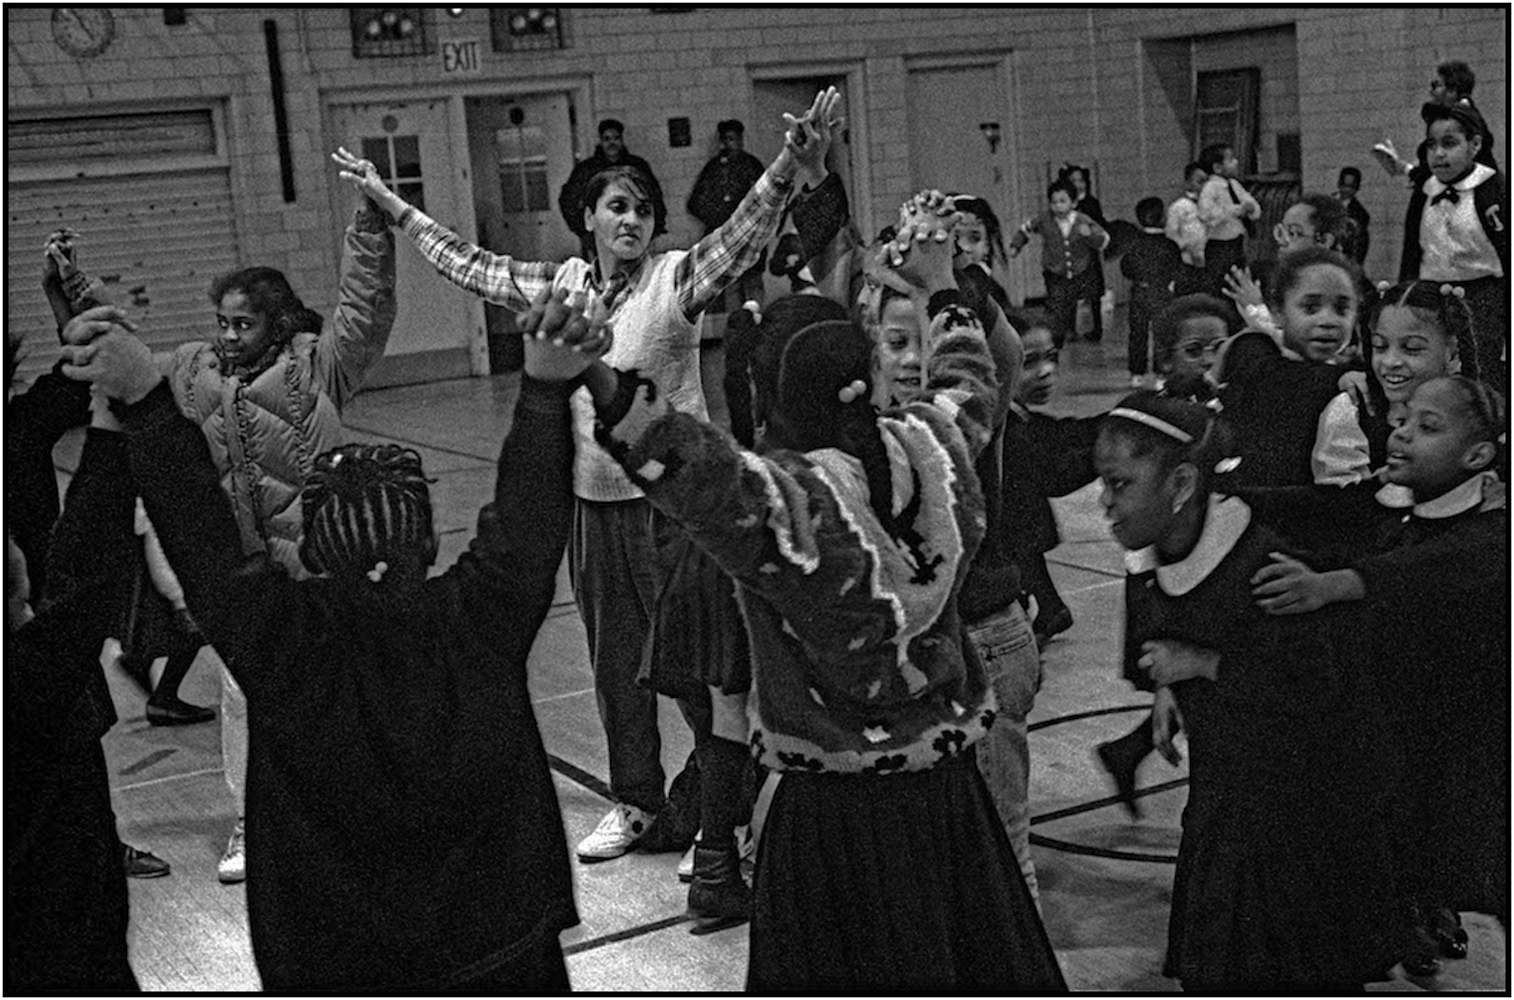   School Aide Gloria Jackson leads children at circle game in an after-school program at P.S. 176, Queens. 1991.  